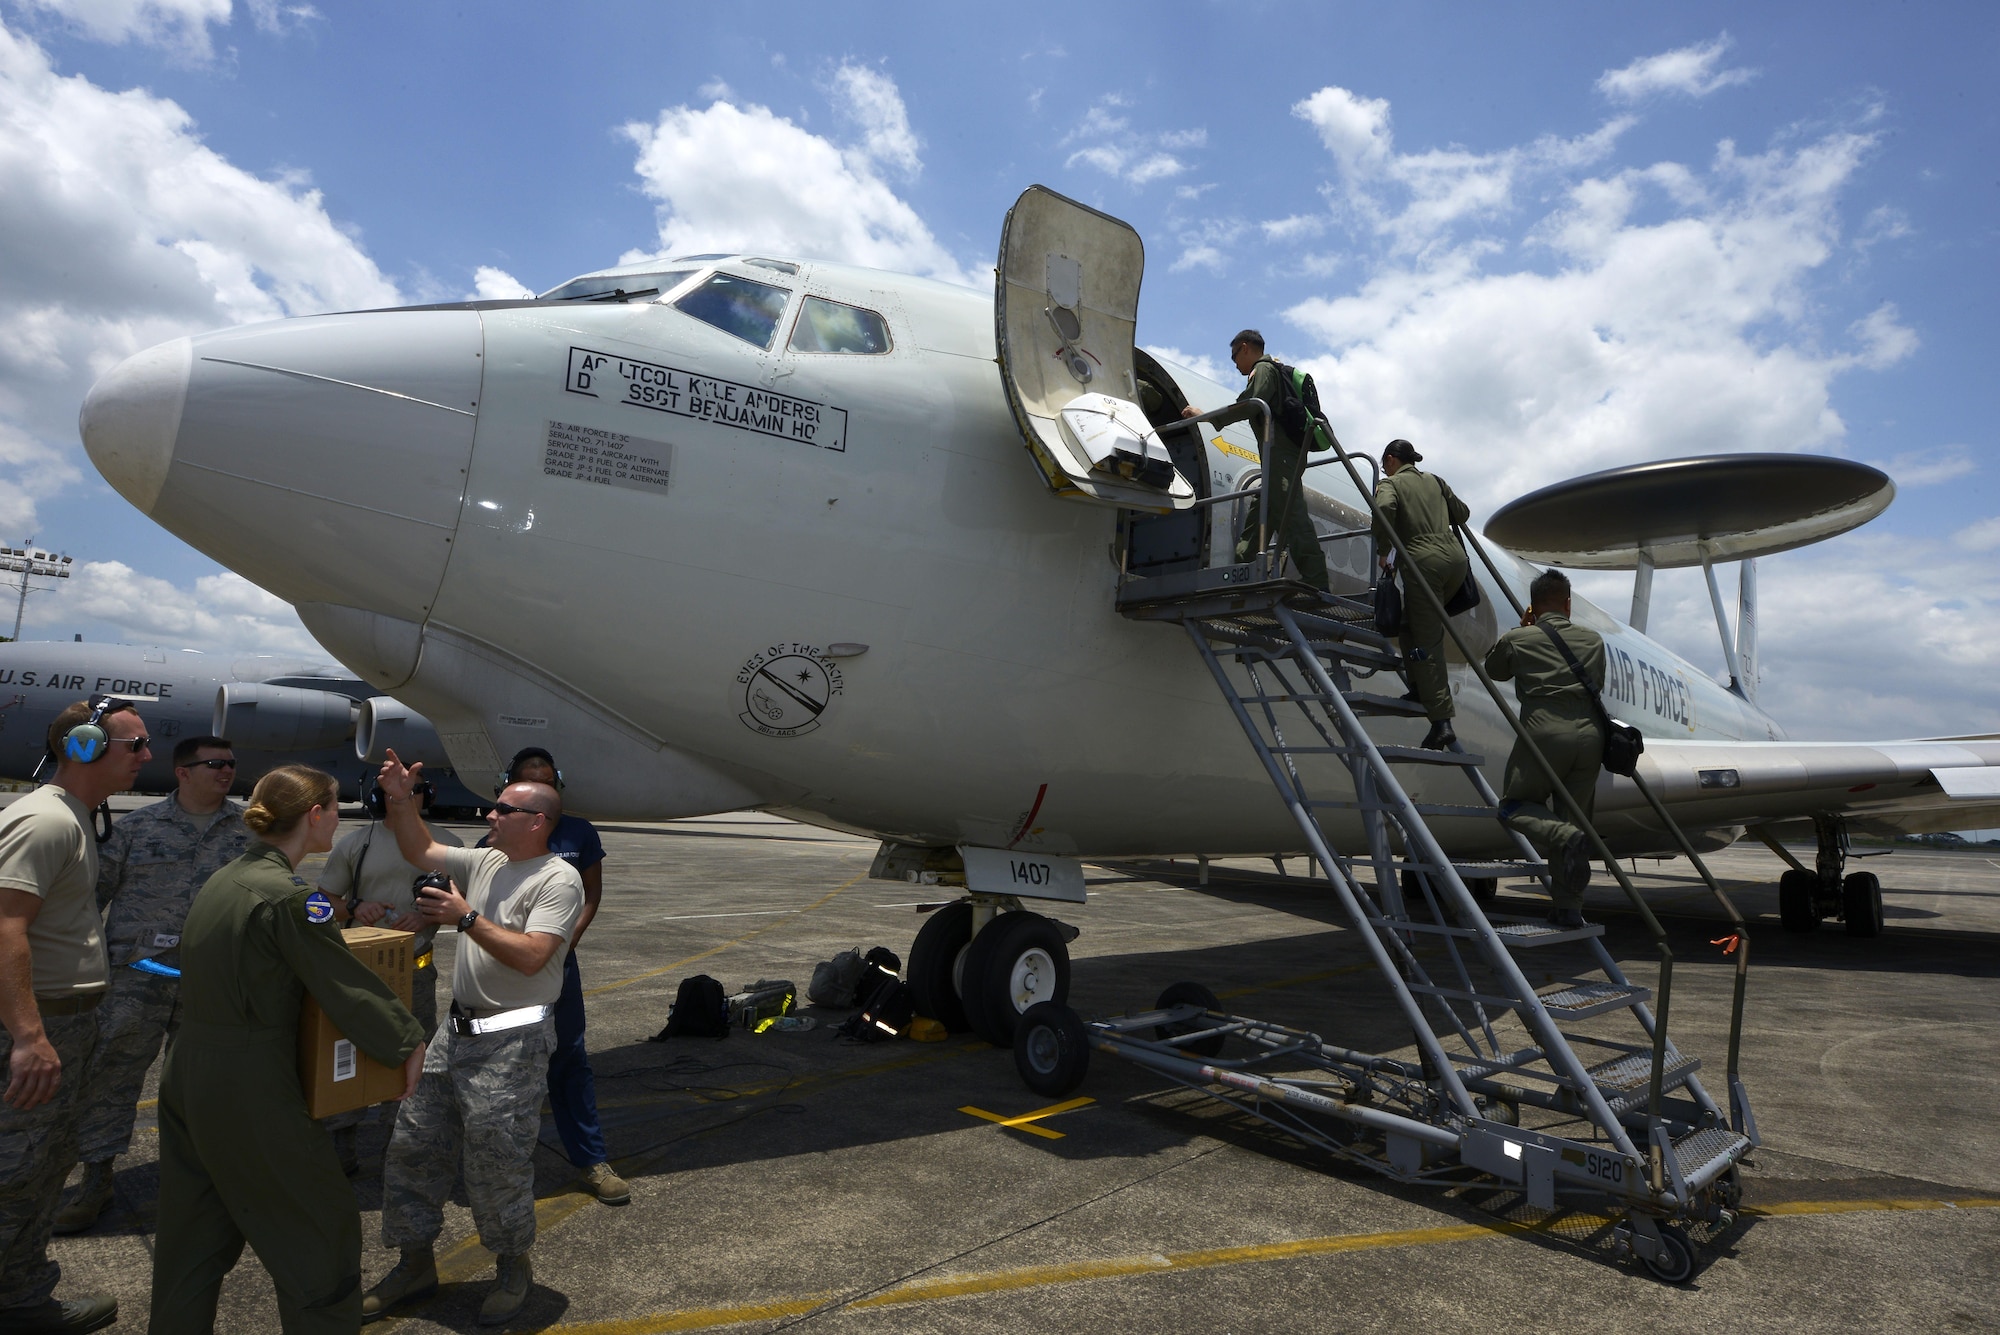 Airmen from the 961st Airborne Air Control Squadron and Aircraft Maintenance Unit discuss preflight information while Philippine Air Force (PAF) air battle managers board a 961st AACS E-3 Sentry AWACS during exercise Balikatan 2015 on Clark Air Base, Philippines, April 23, 2015. This exercise marks the first time in history that PAF air battle managers have controlled other aircraft while on board the AWACS. Since the exercise began April 20, 2015, the 961st AACS has integrated 20 PAF weapons controllers during their missions to provide them with firsthand experience using the aircraft’s systems. The 961st AACS is stationed at Kadena Air Base, Japan. (U.S. Air Force photo/Staff Sgt. Maeson L. Elleman)